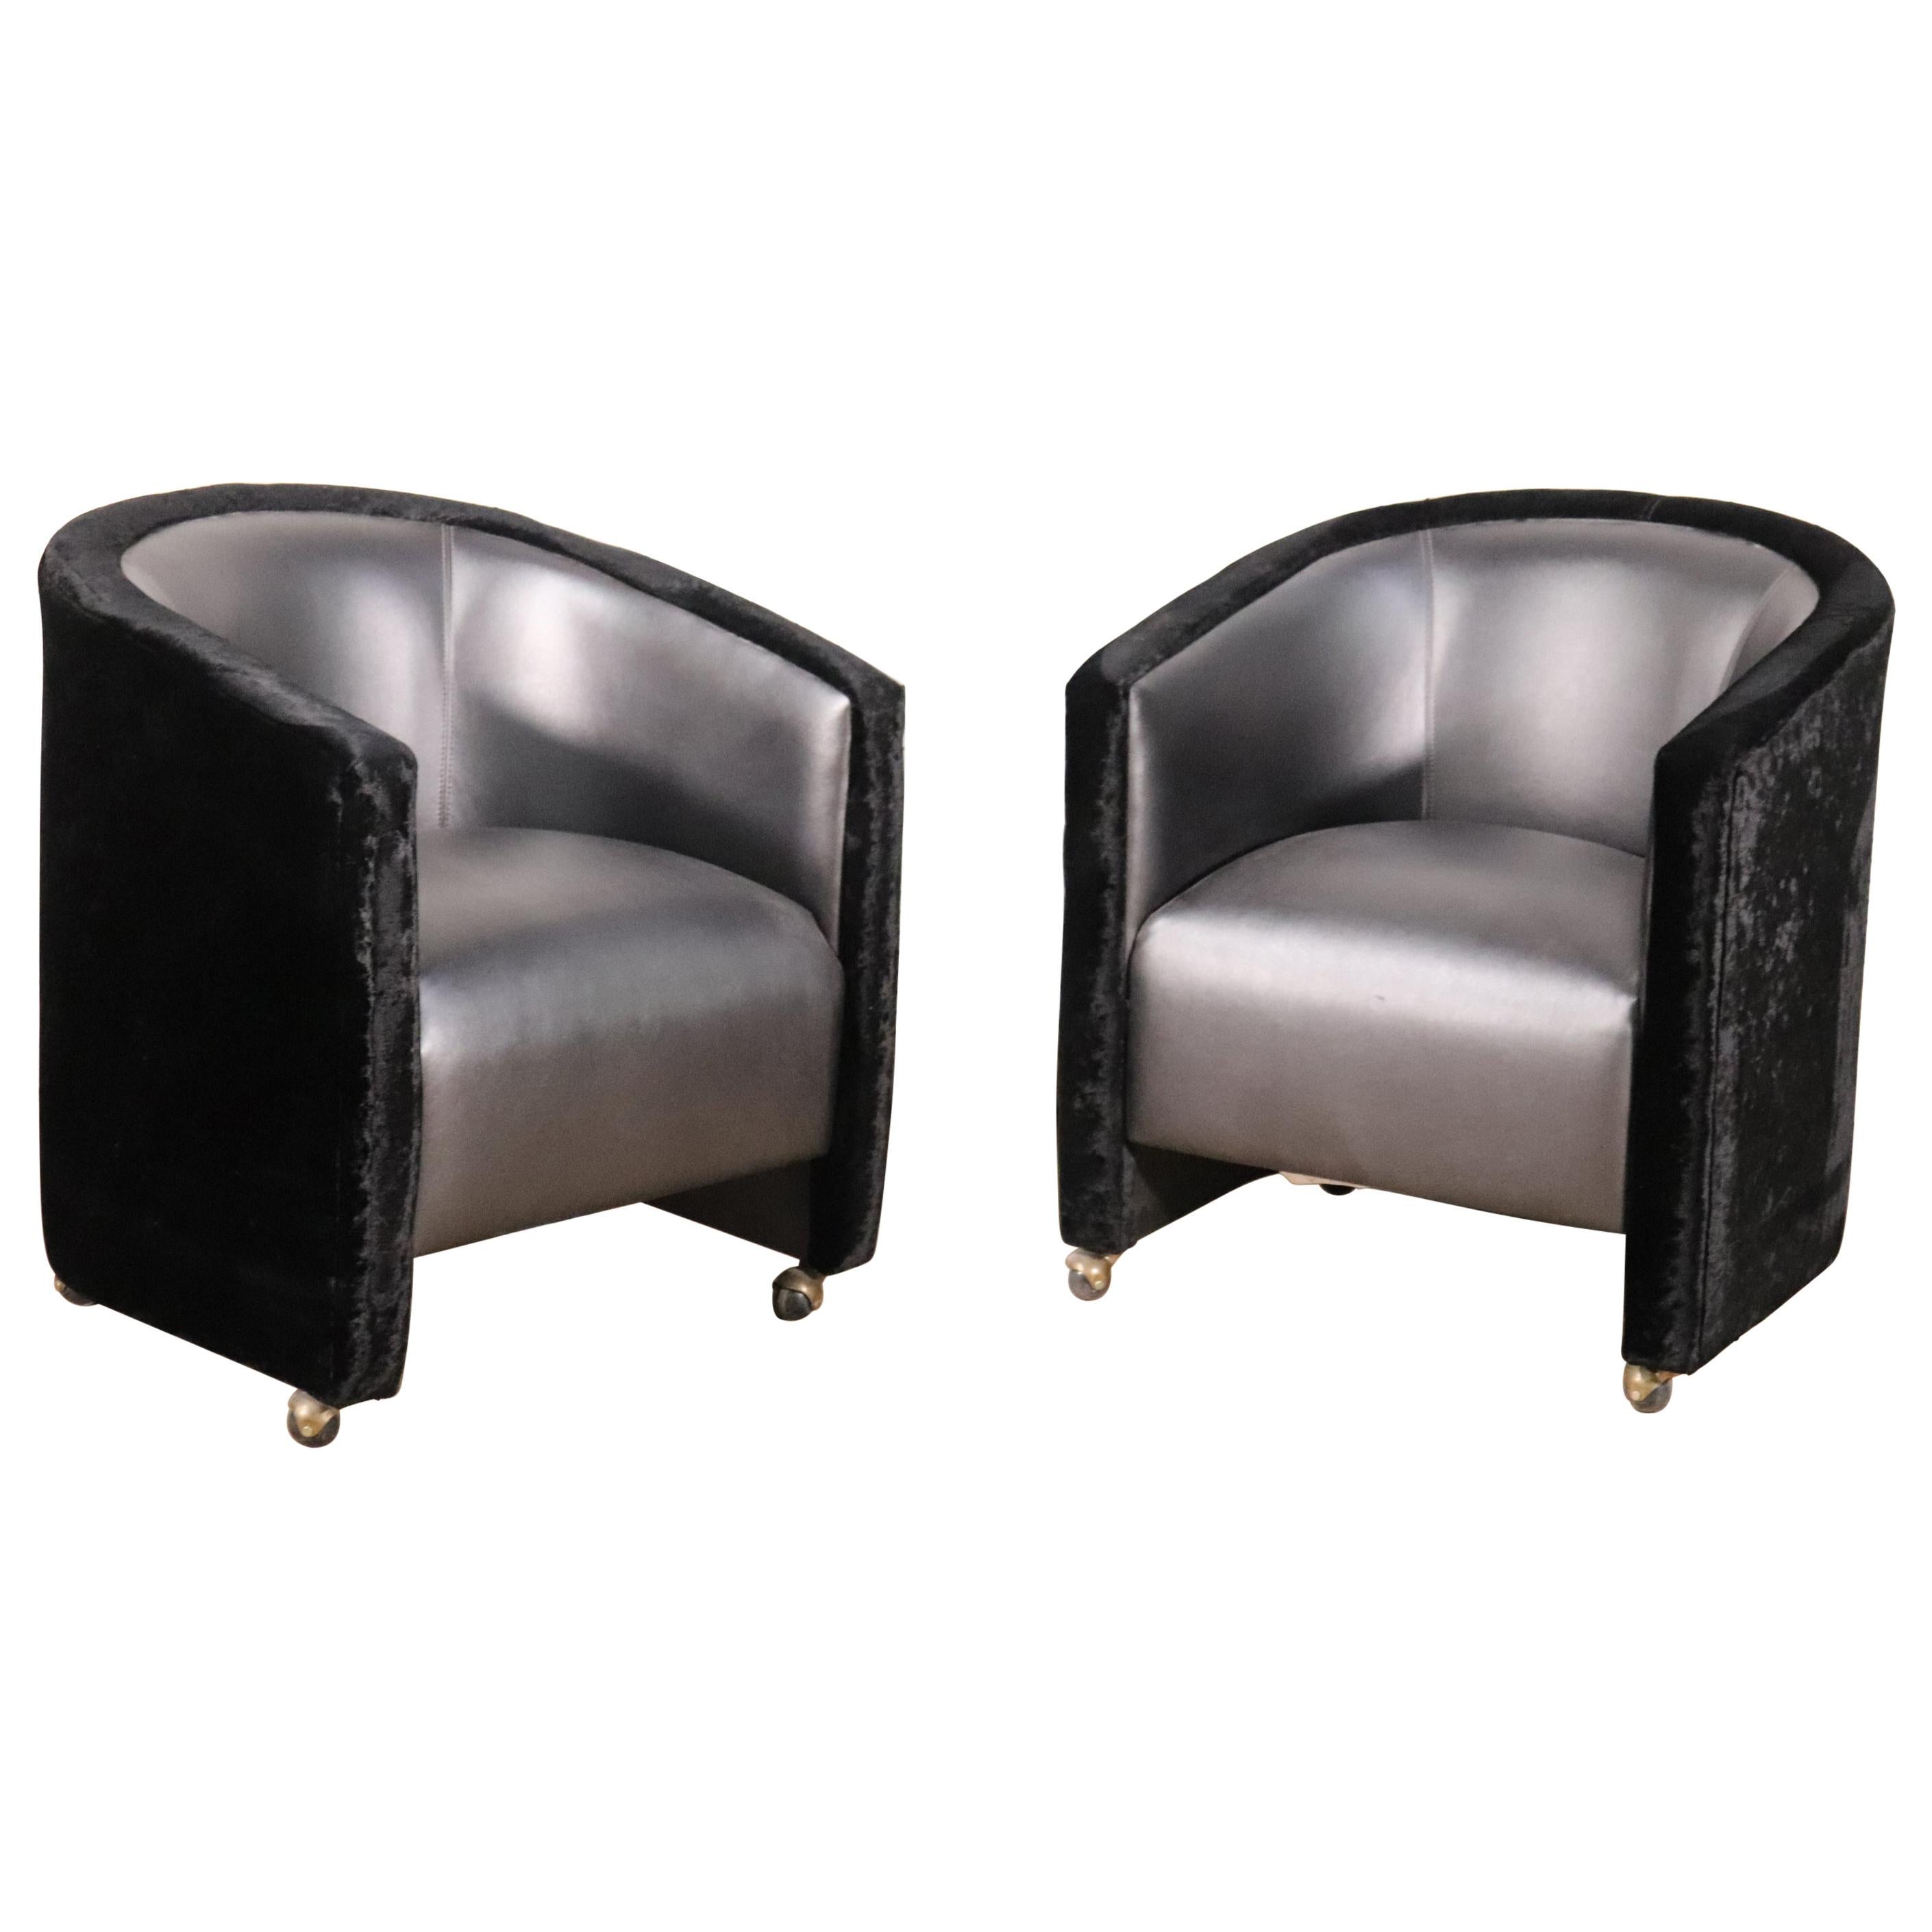 Unique Pair Upholstered Art Deco Style Modern Club Chairs